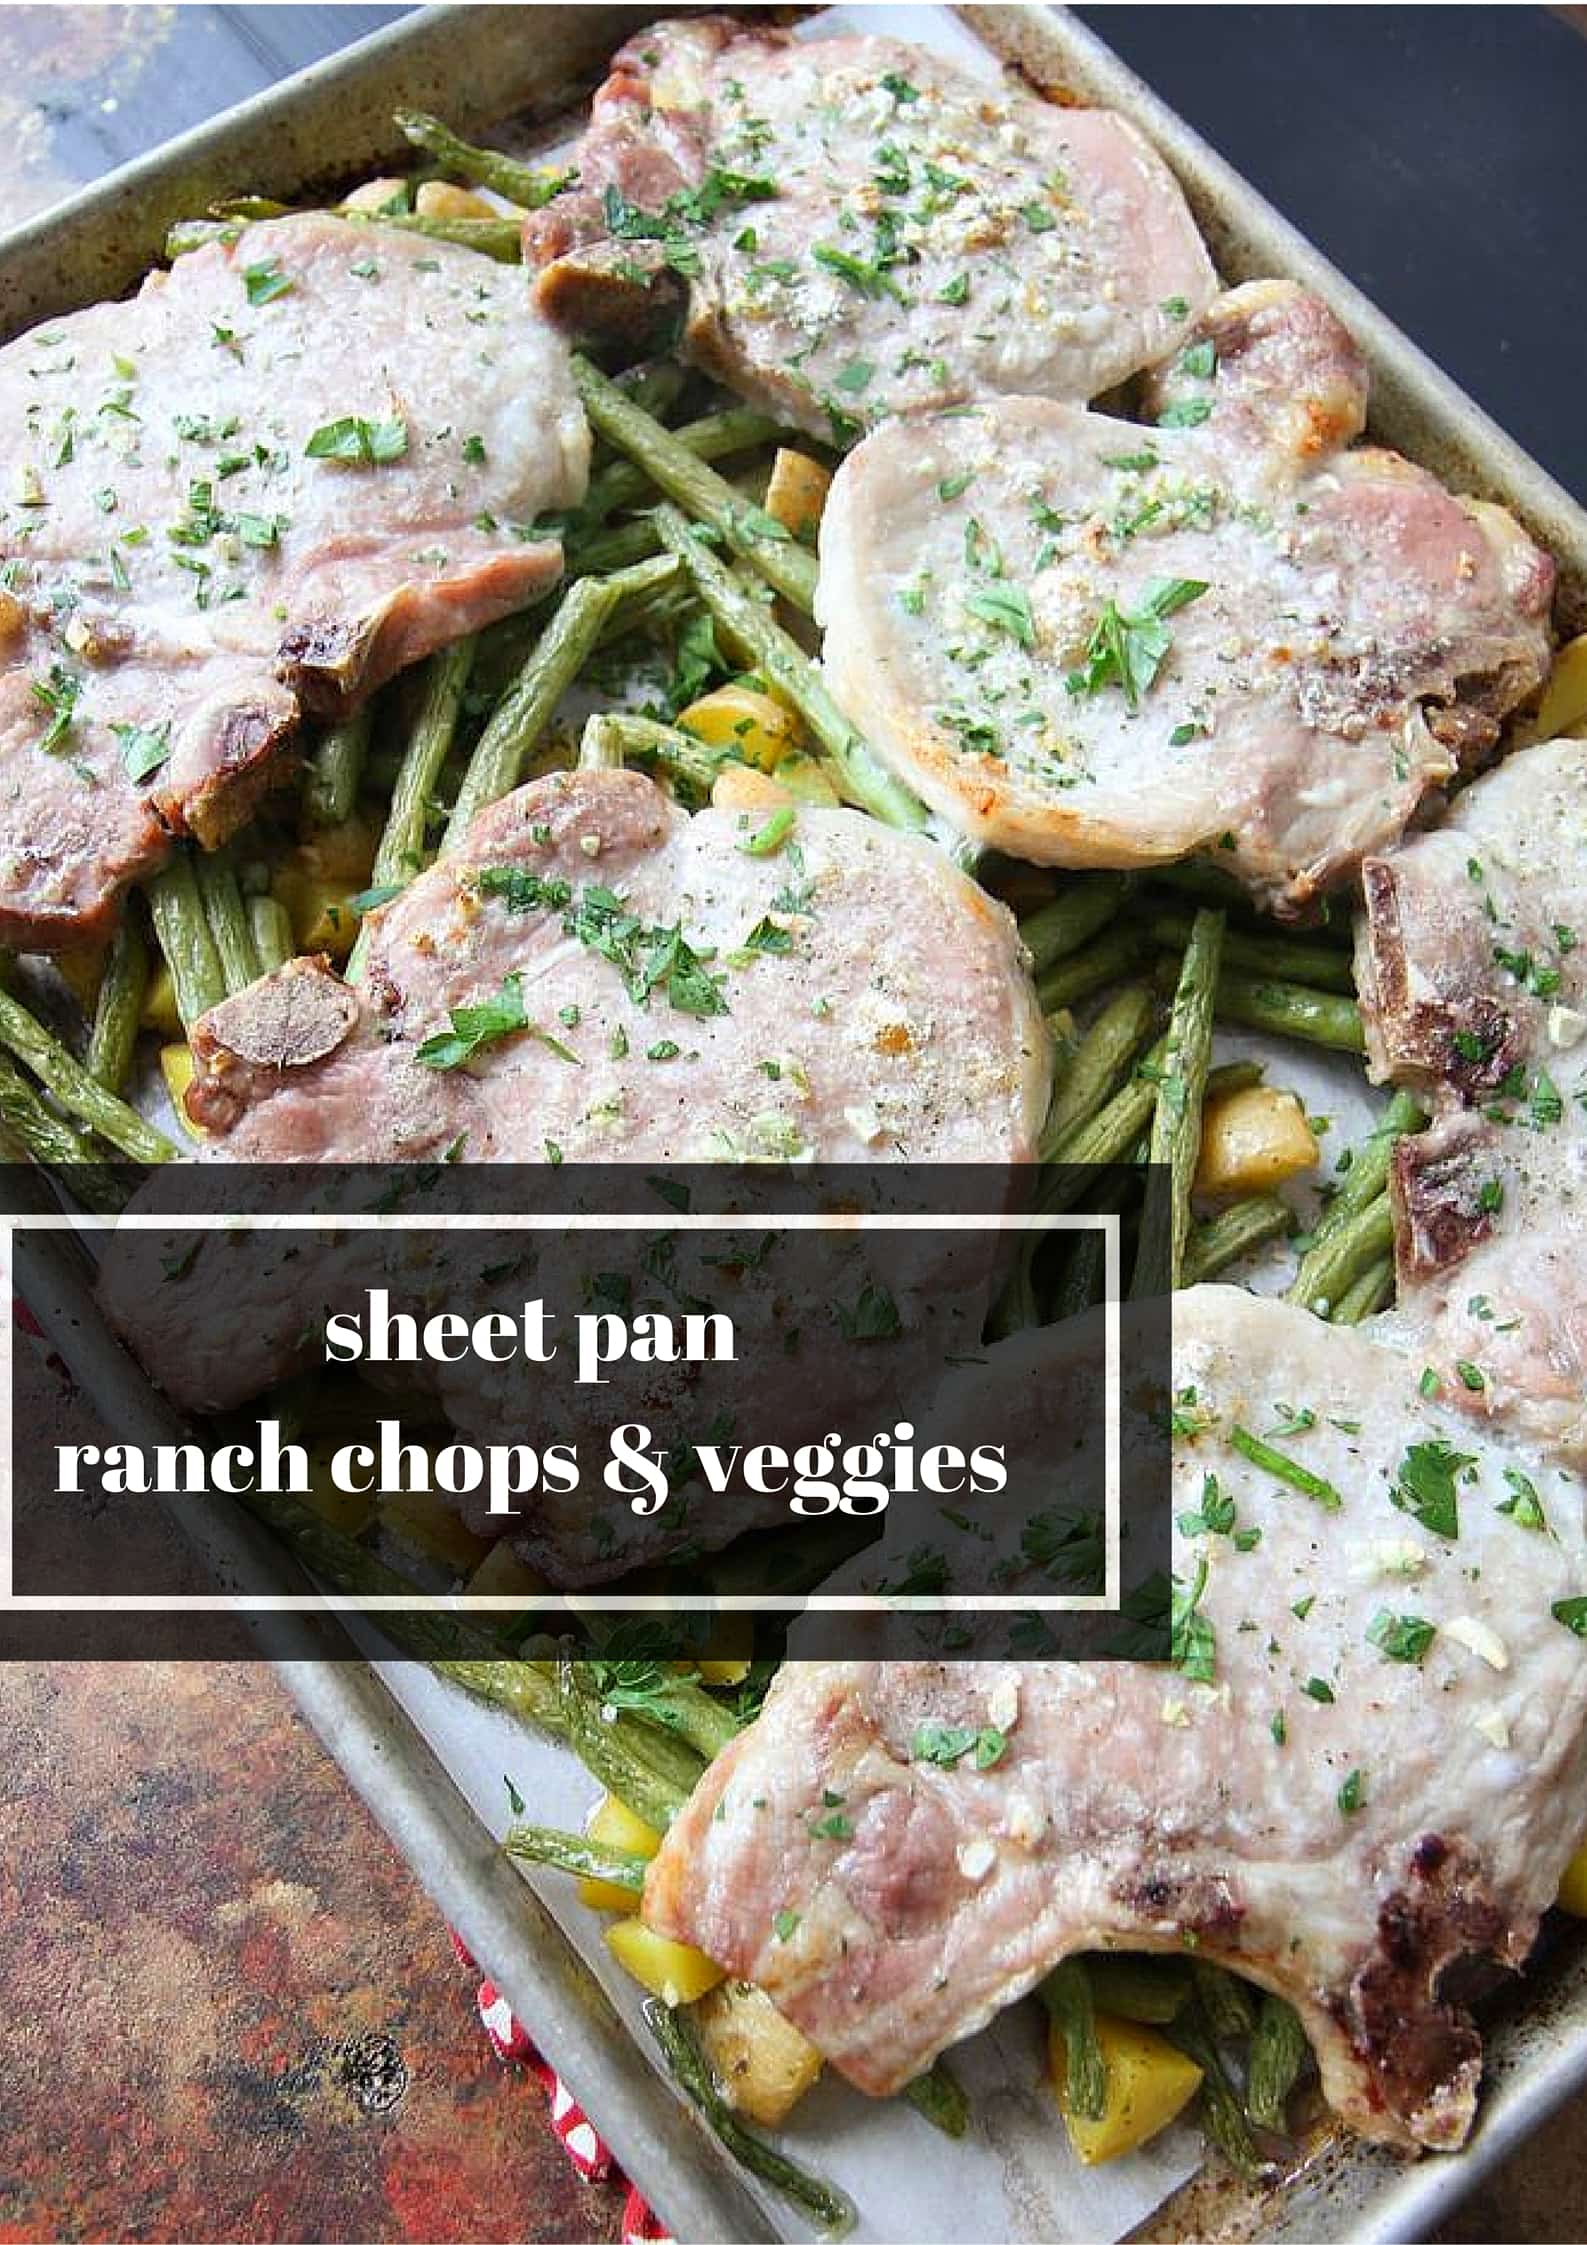 Sheet Pan Ranch Chops and Veggies from MomAdvice.com